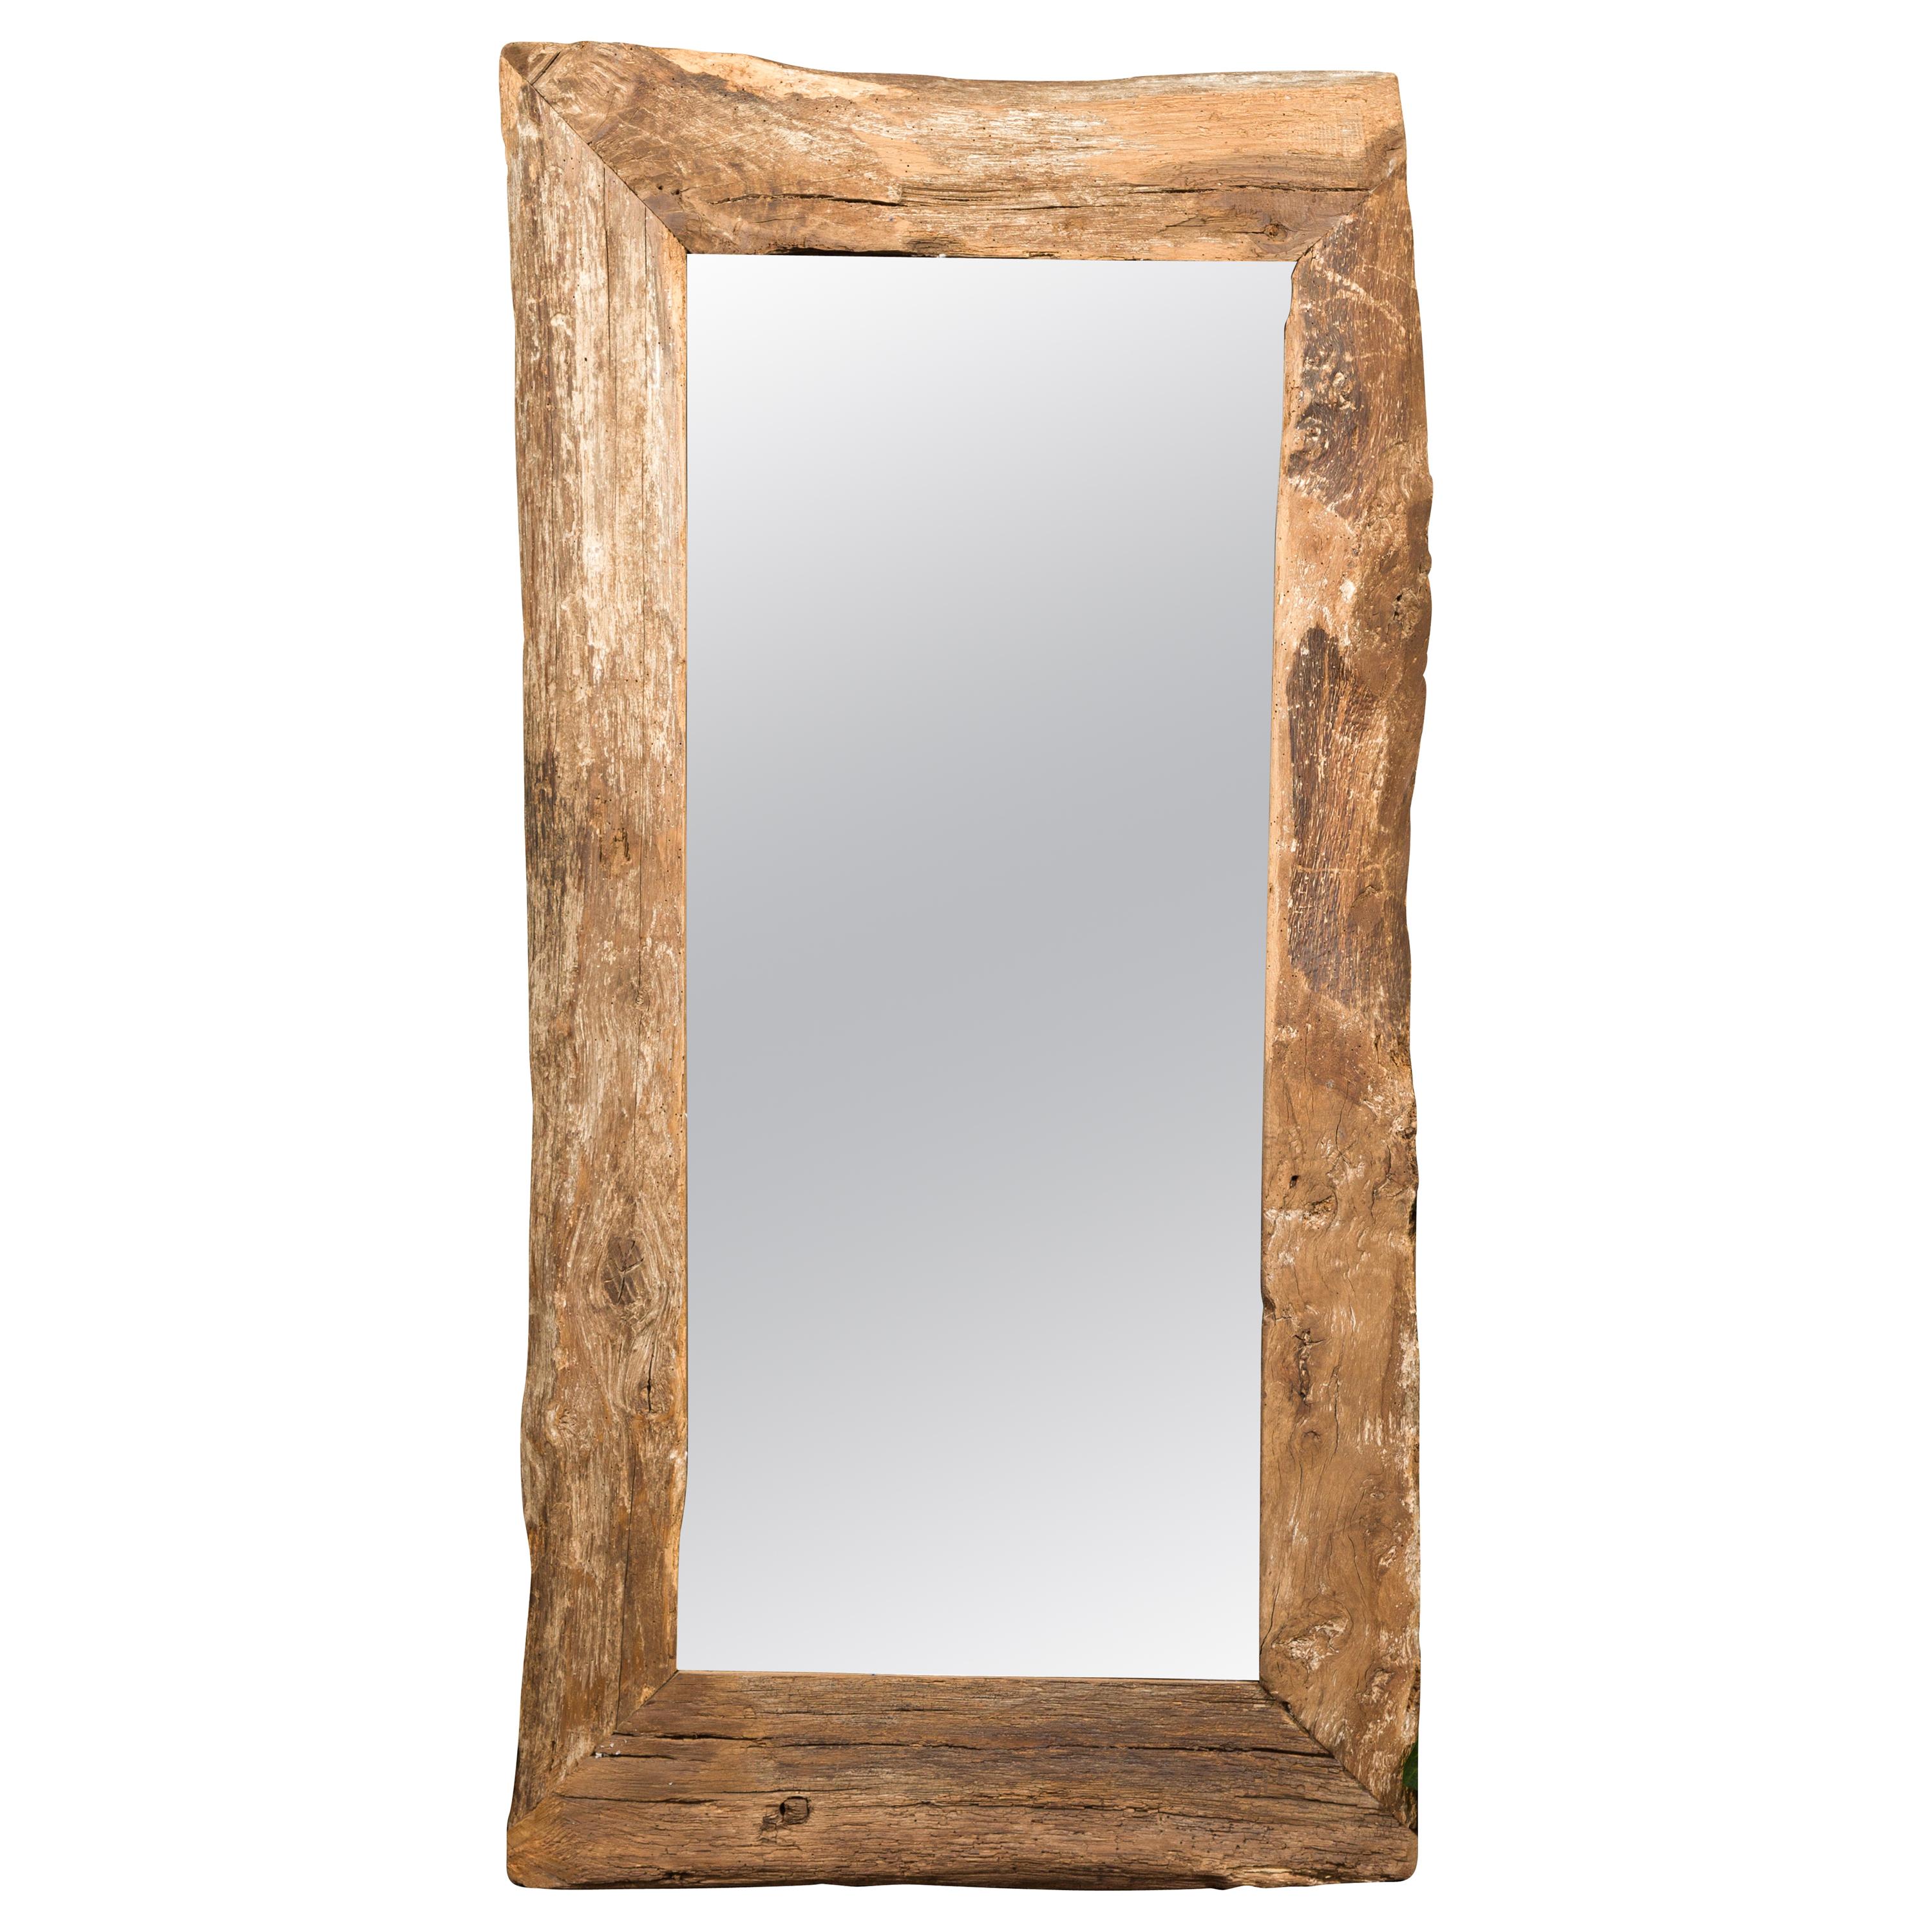 Rustic French Mirror Made from Mid-19th Century Wood with Antiqued Glass